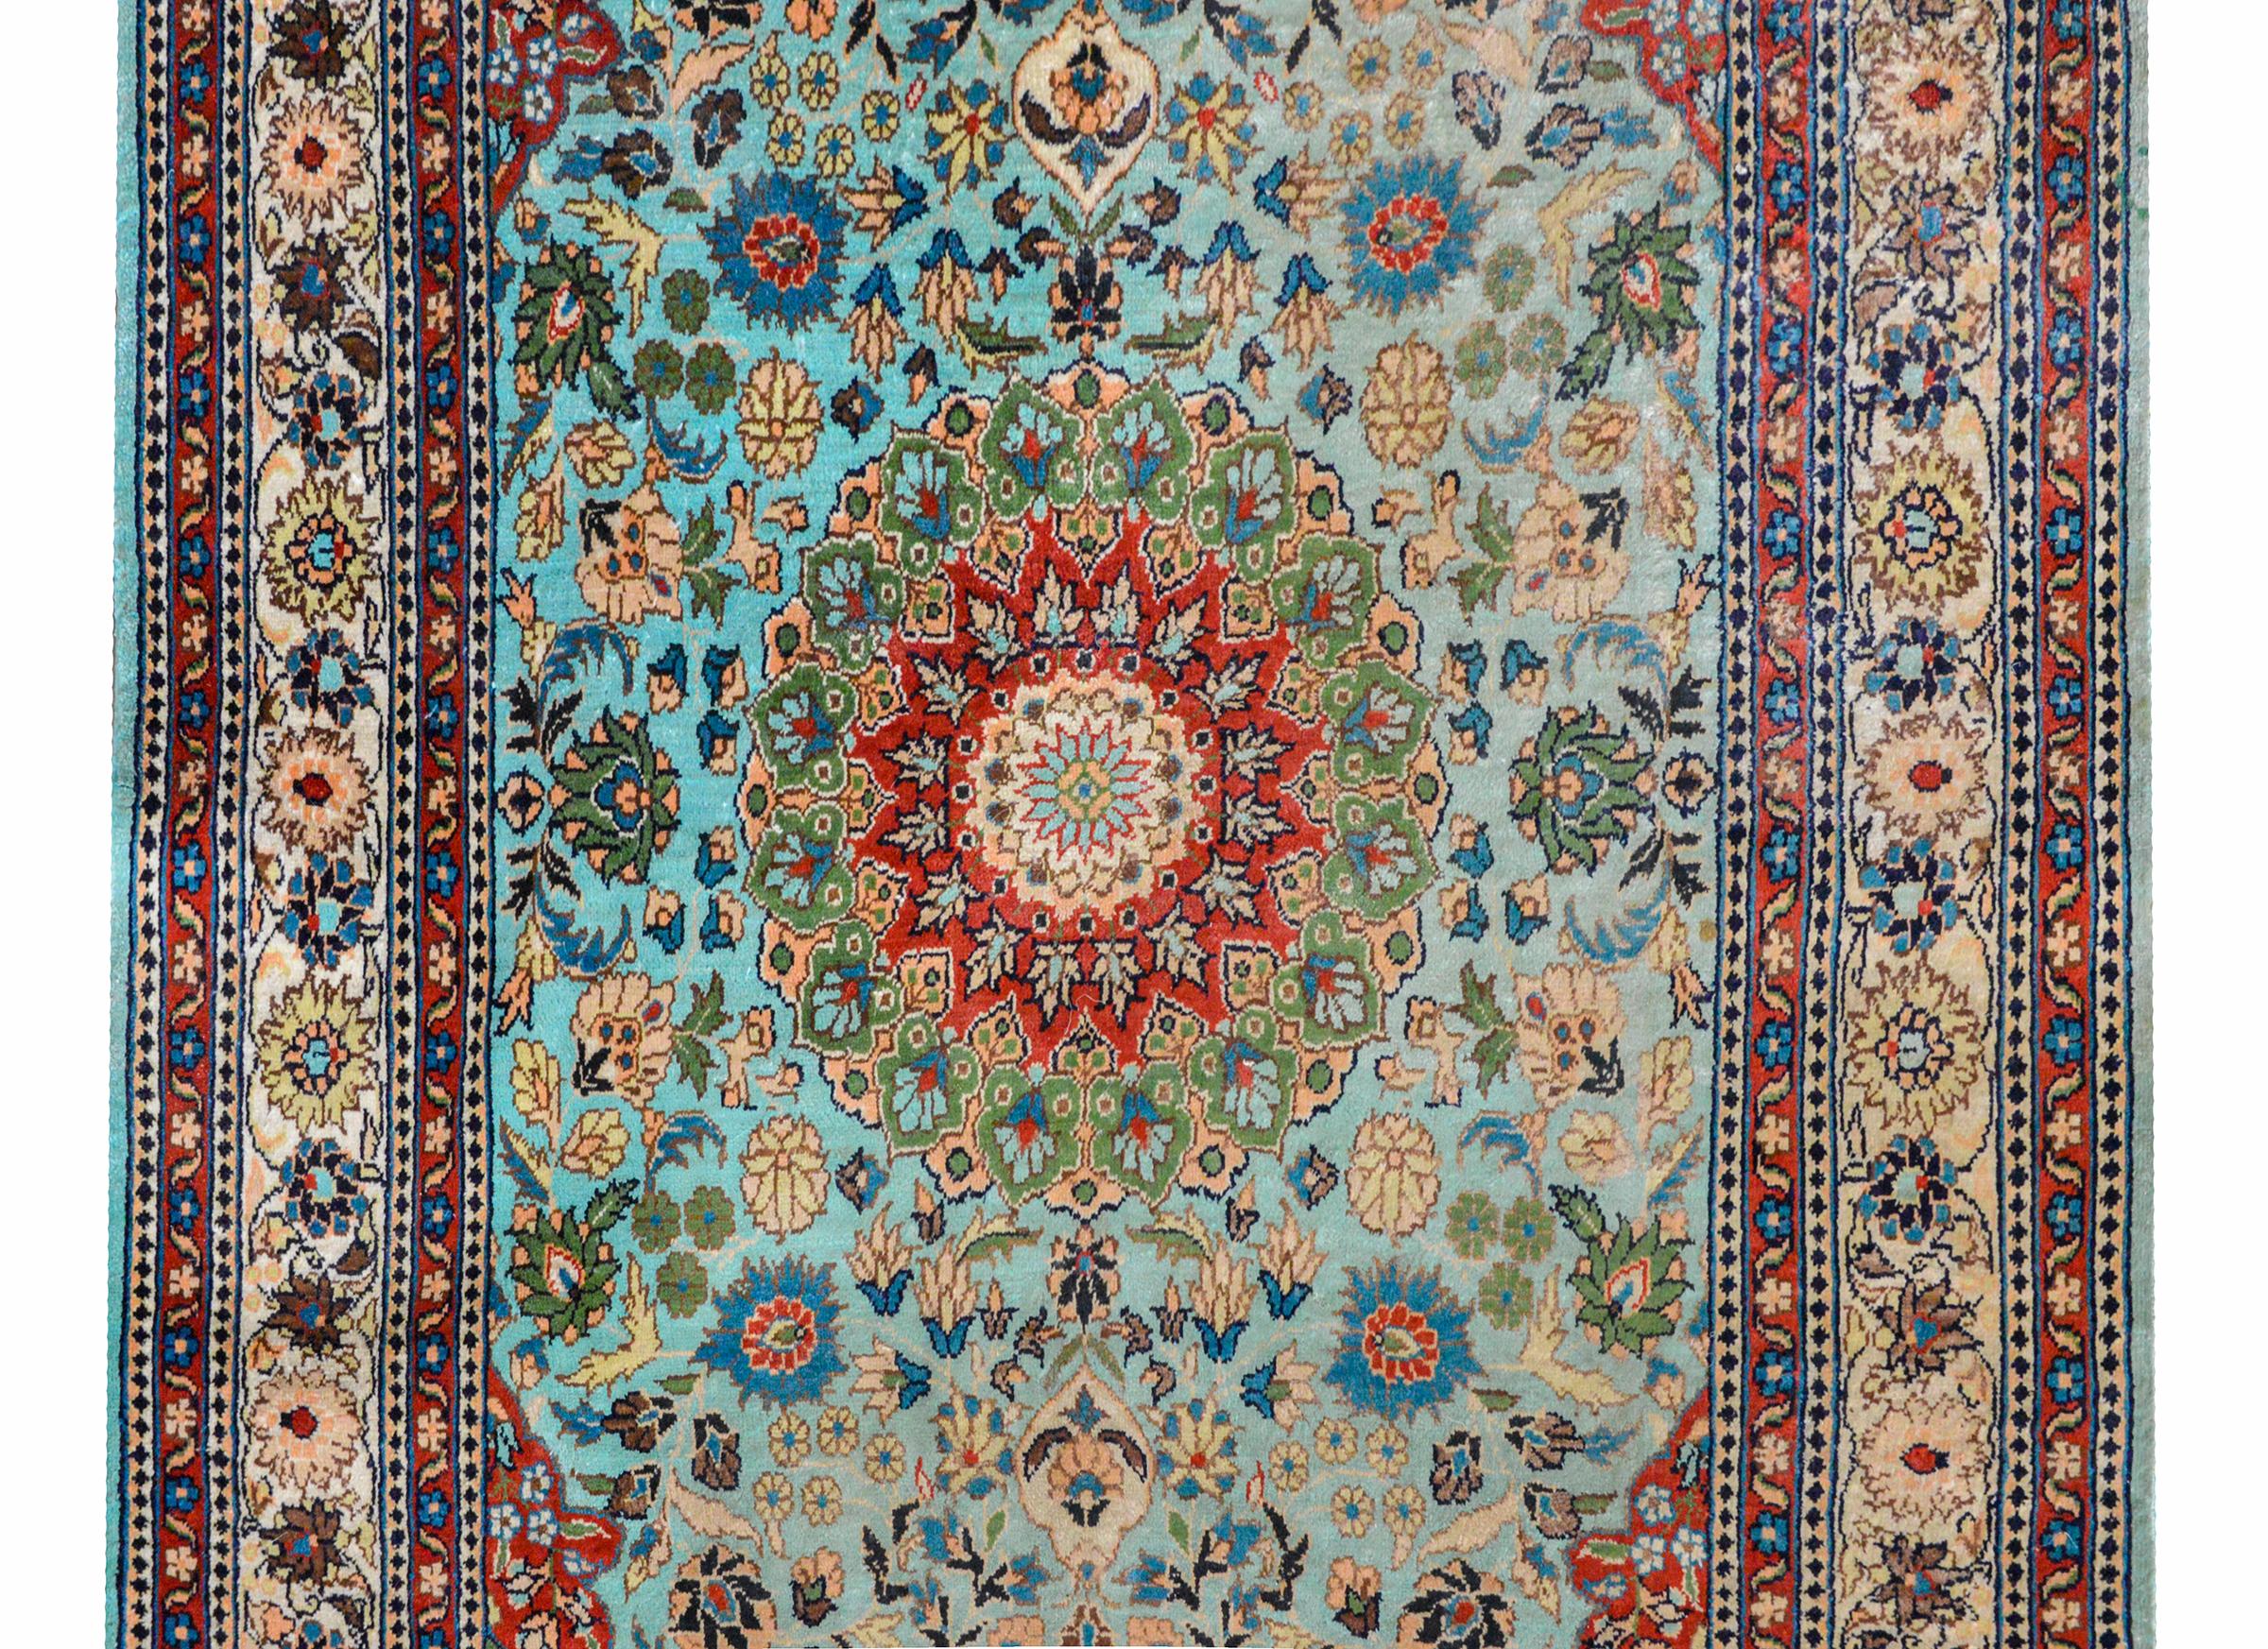 A beautiful vintage Chinese silk rug with a large central floral medallion amidst a field of large-scale flowers all woven in light and dark indigo, cream, green, and white against a light sky blue background, and surrounded by a wide floral